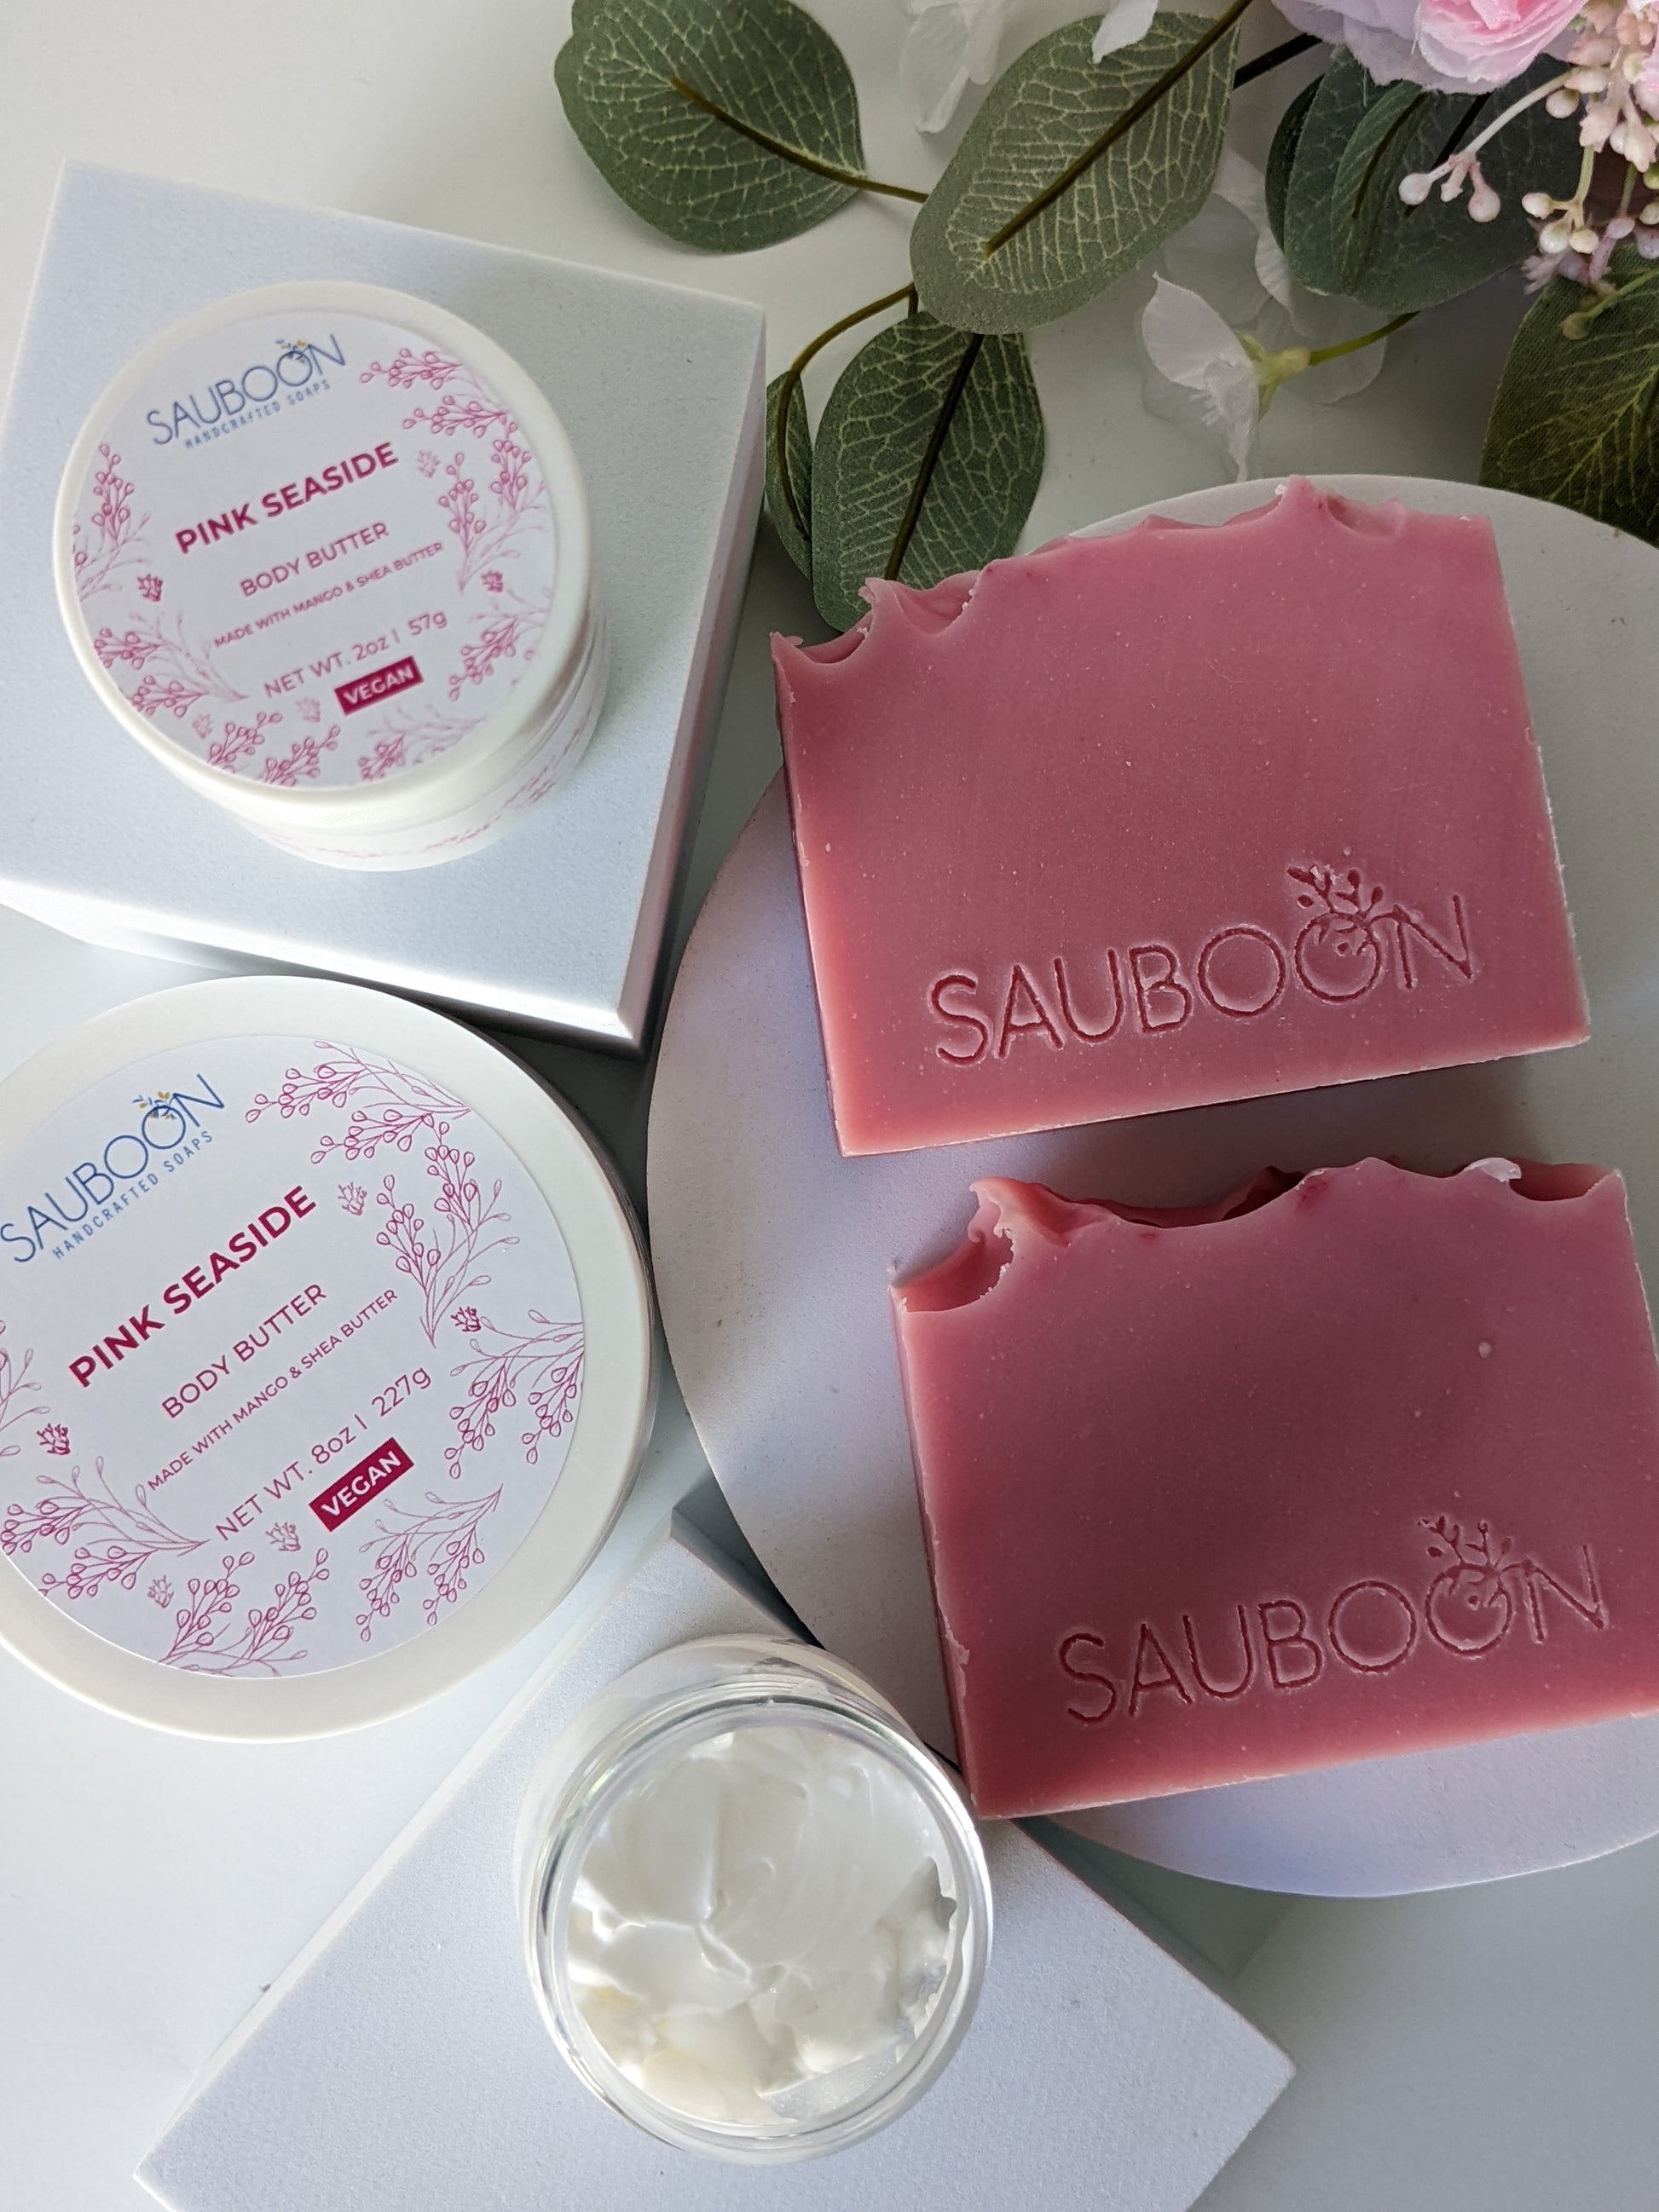 Our handcrafted vegan luxurious soaps are made locally here in San Diego in small batches.  Highest quality ingredients used to give the best lather, nourishment, and cleansing experience.  We use different type of clays in each soap including rhasoul clay, kaolin clay, rose clay, red Moroccan clay, French green clay which add to the beautiful washing experience using our soaps. Great for gifting for birthdays, celebrations, bridal showers or self care gift to yourself!